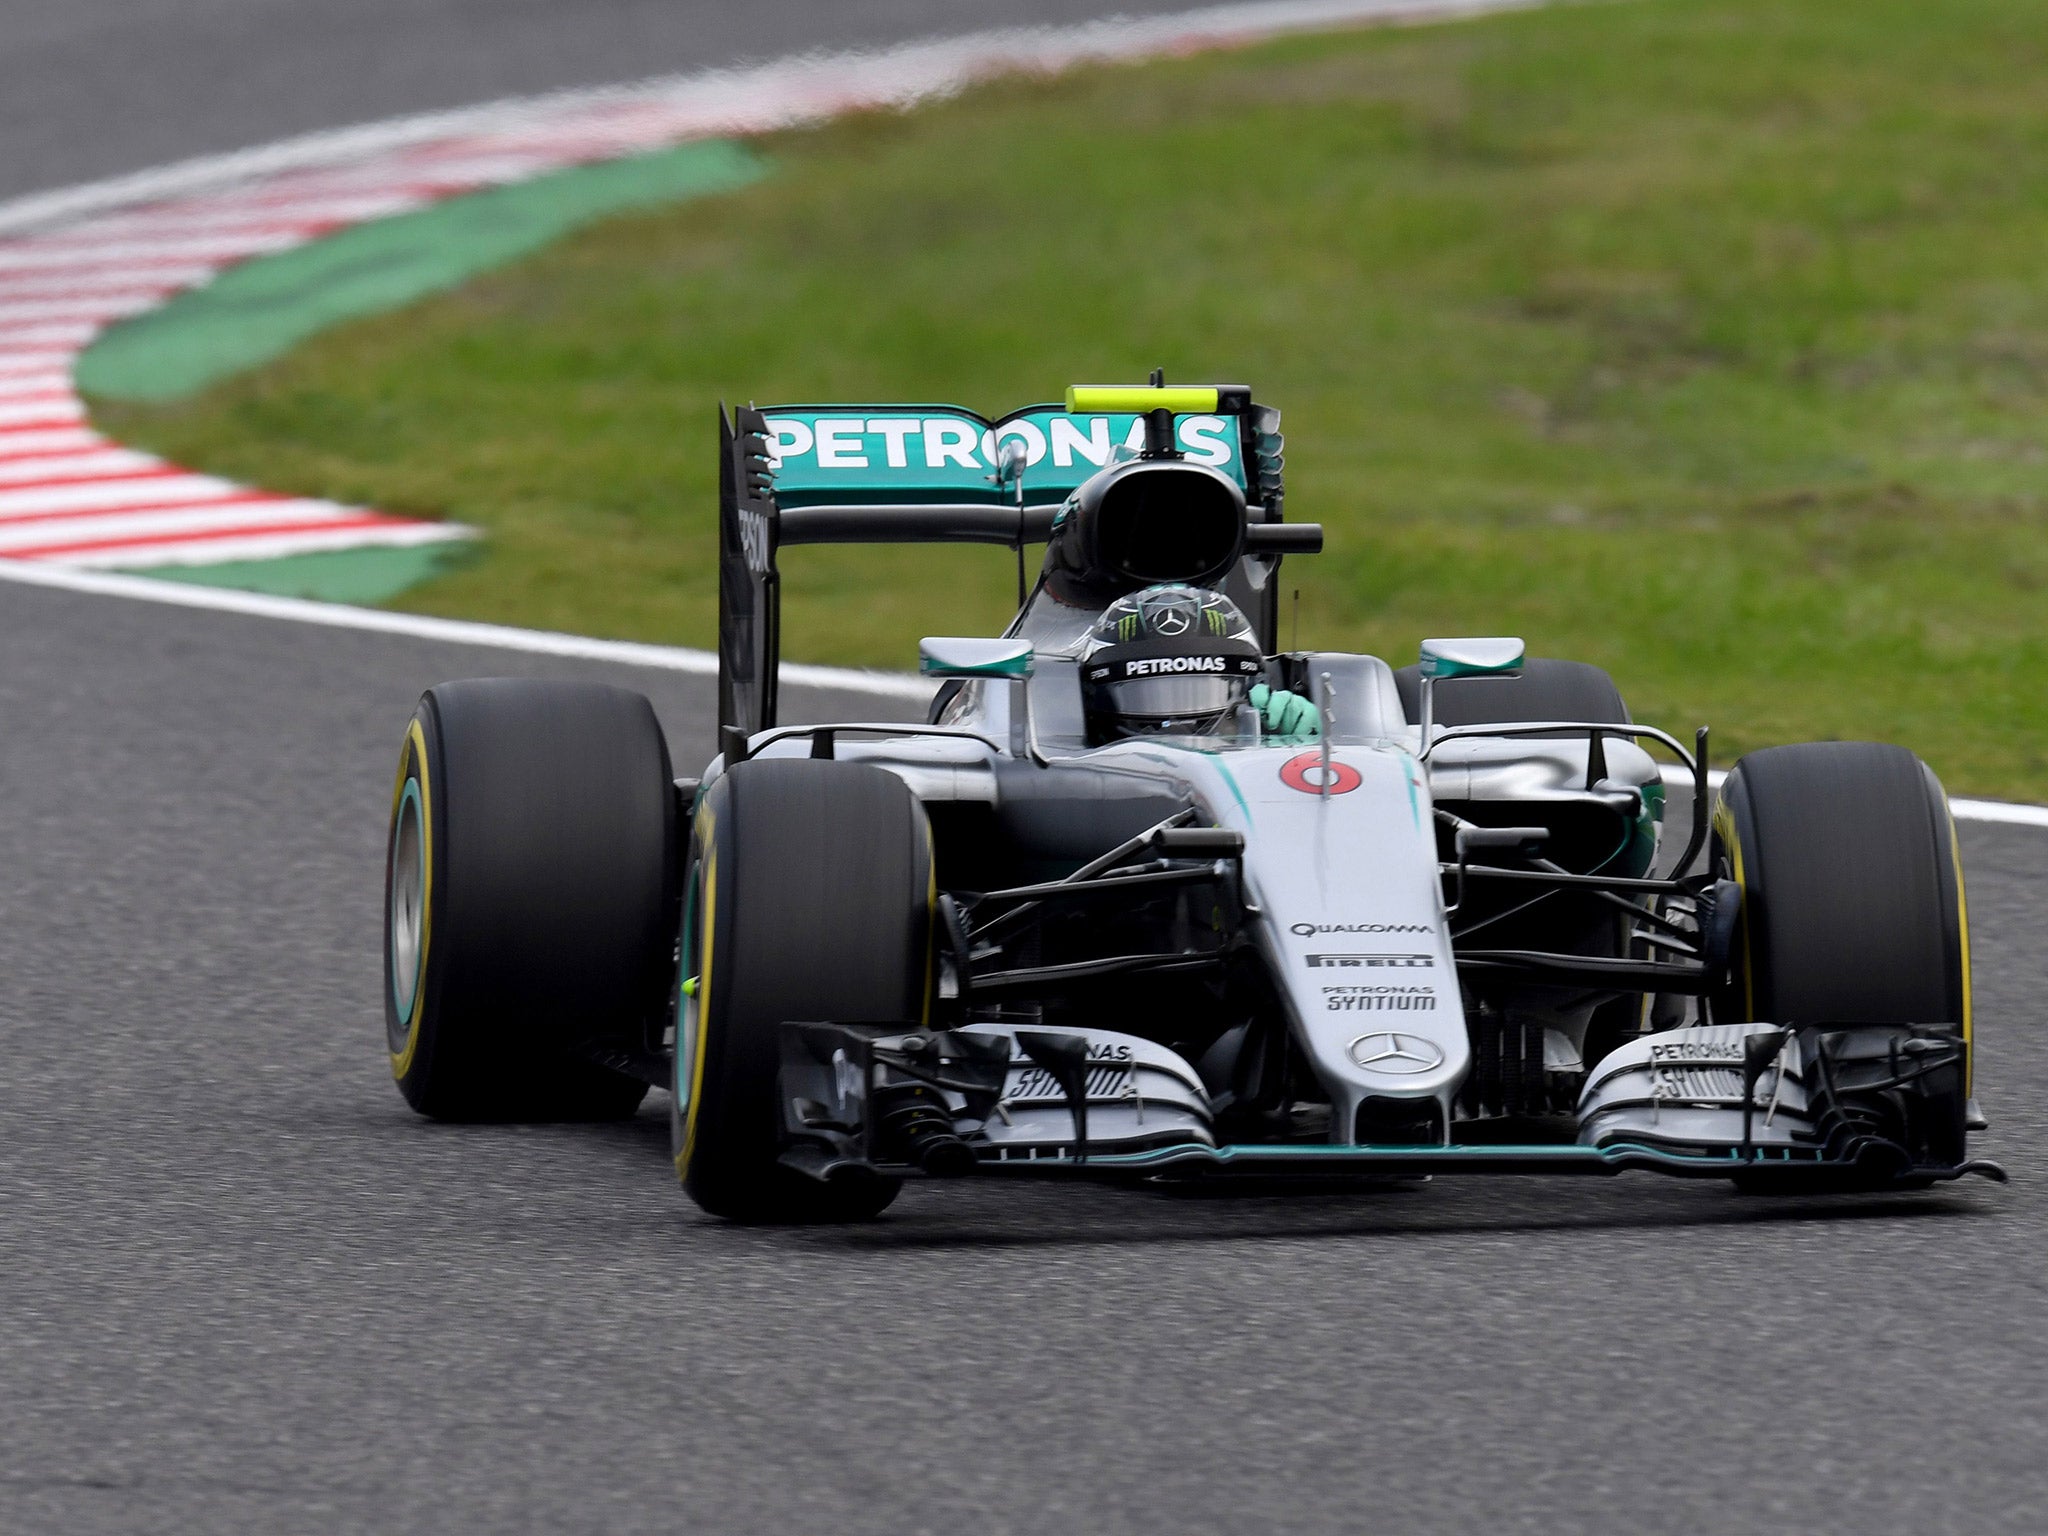 Nico Rosberg will start the Japanese Grand Prix from pole position